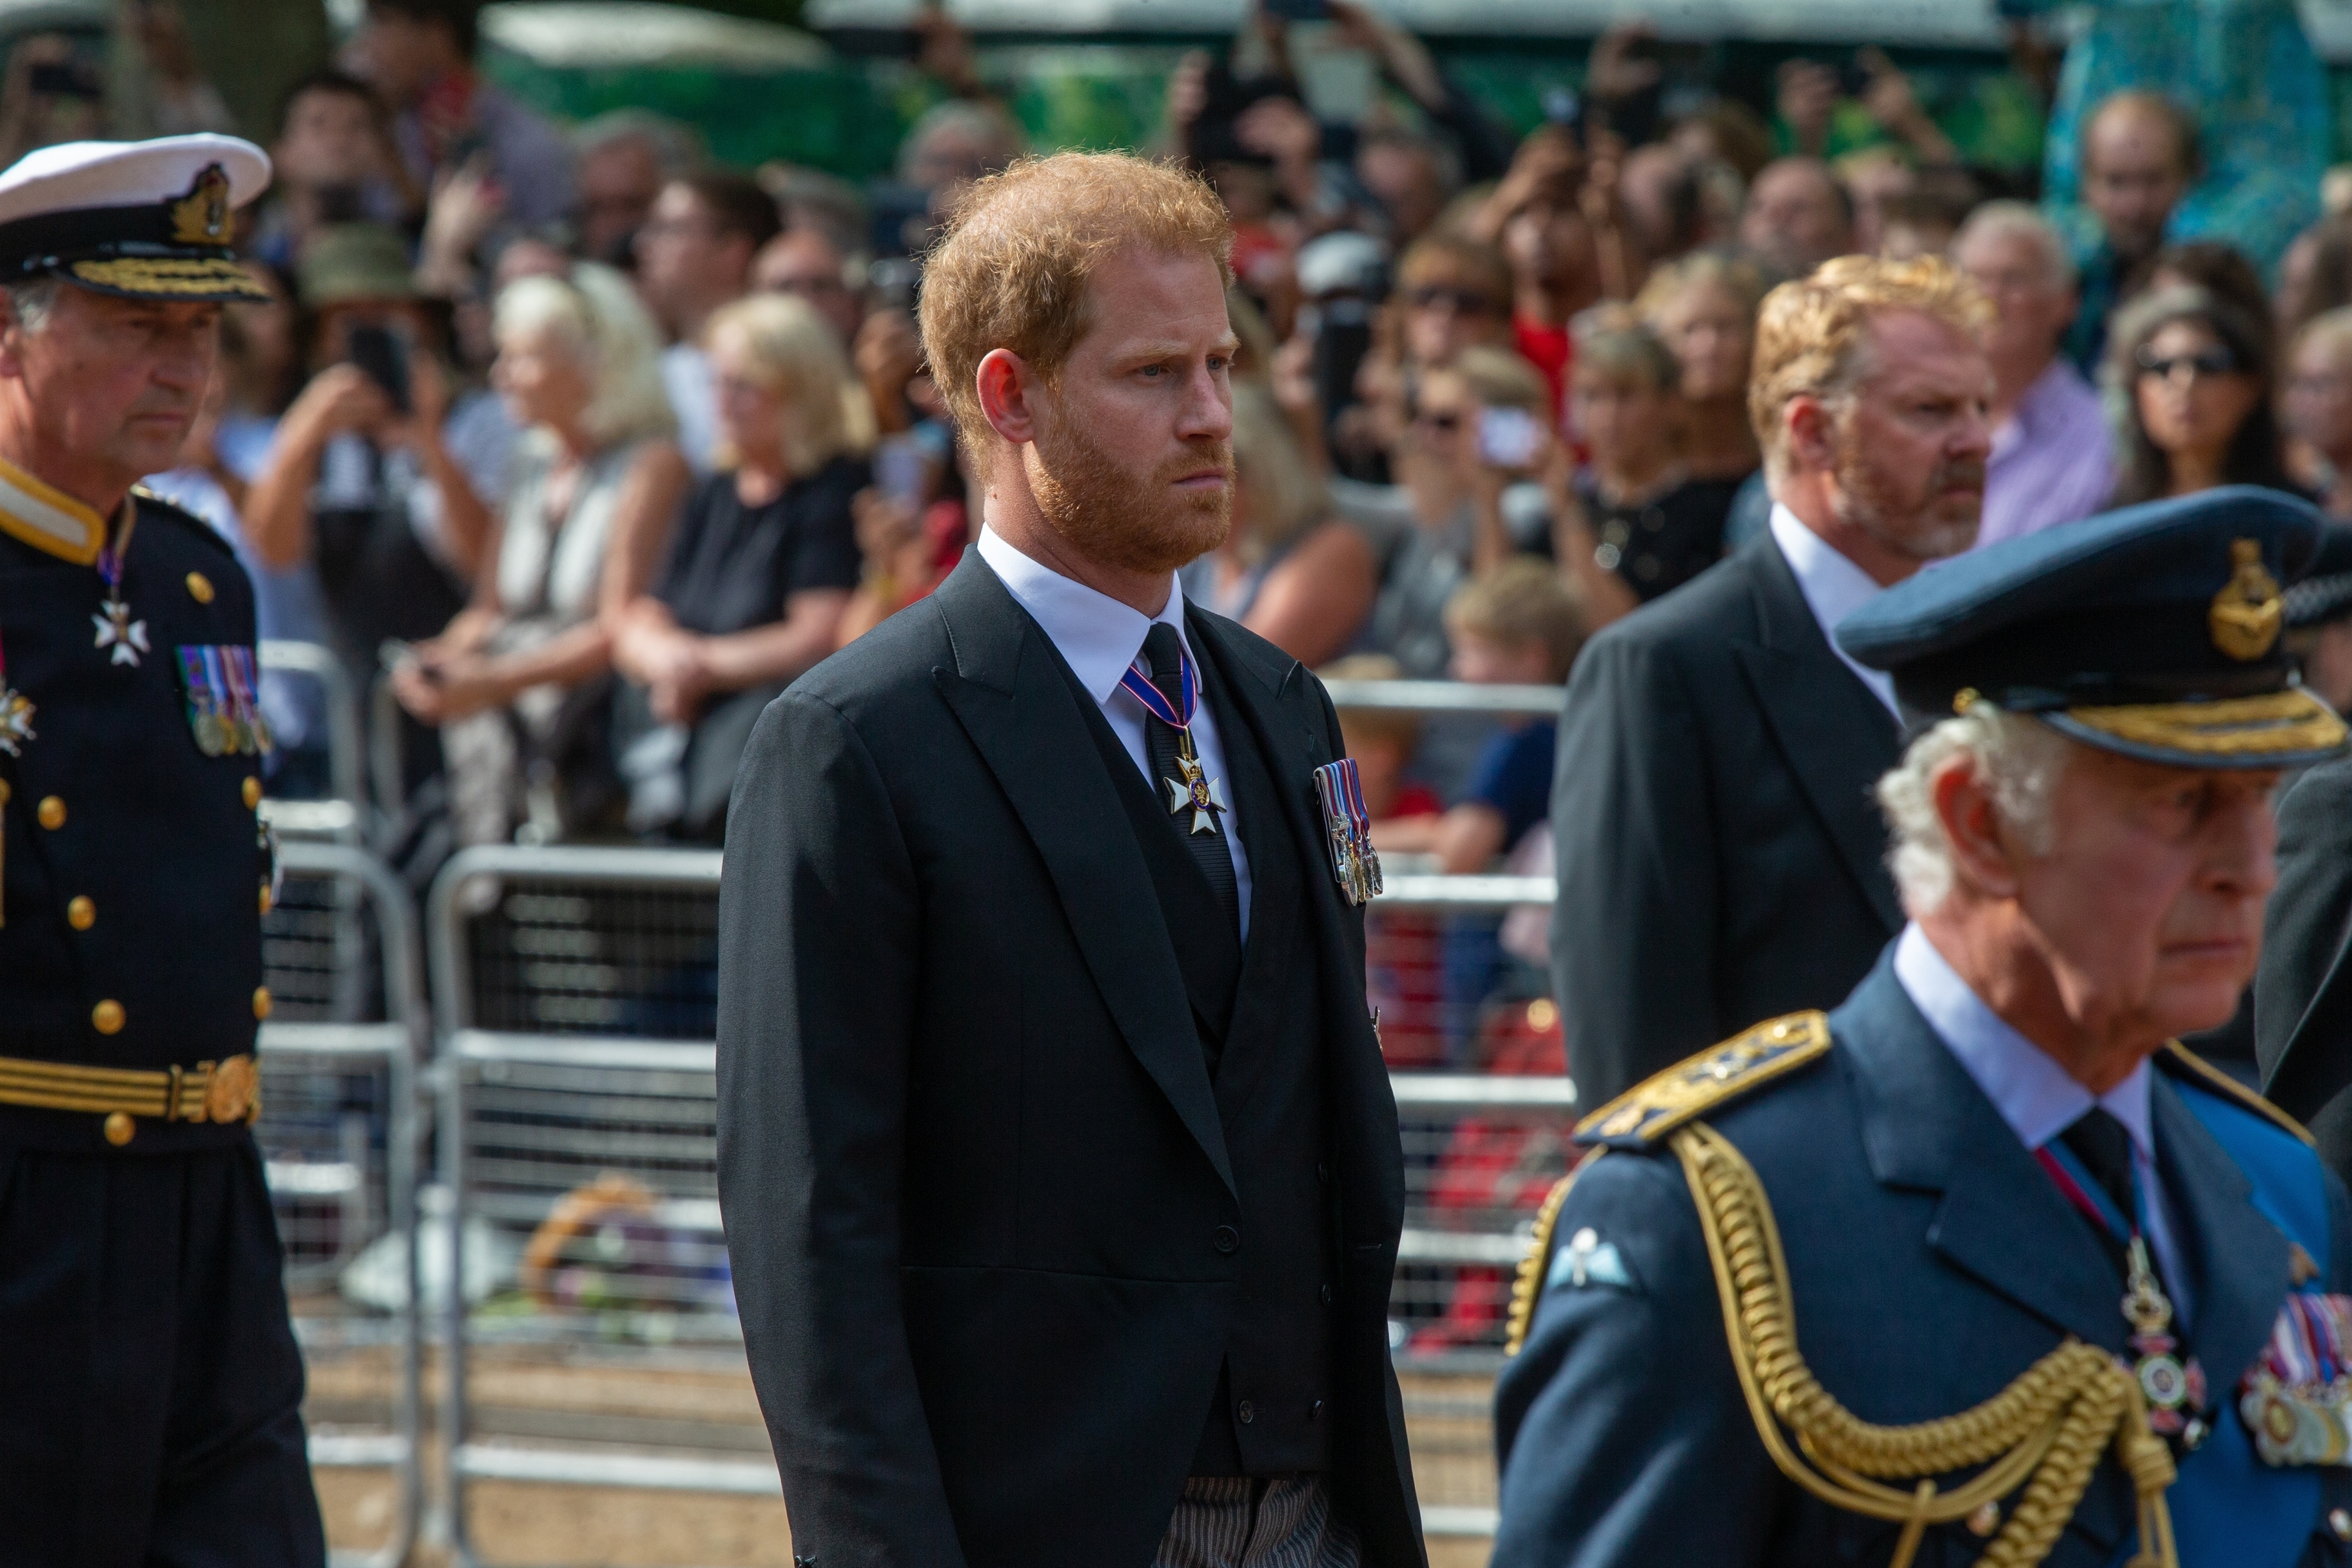 Prince Harry follows the Queen's coffin during her state funeral.